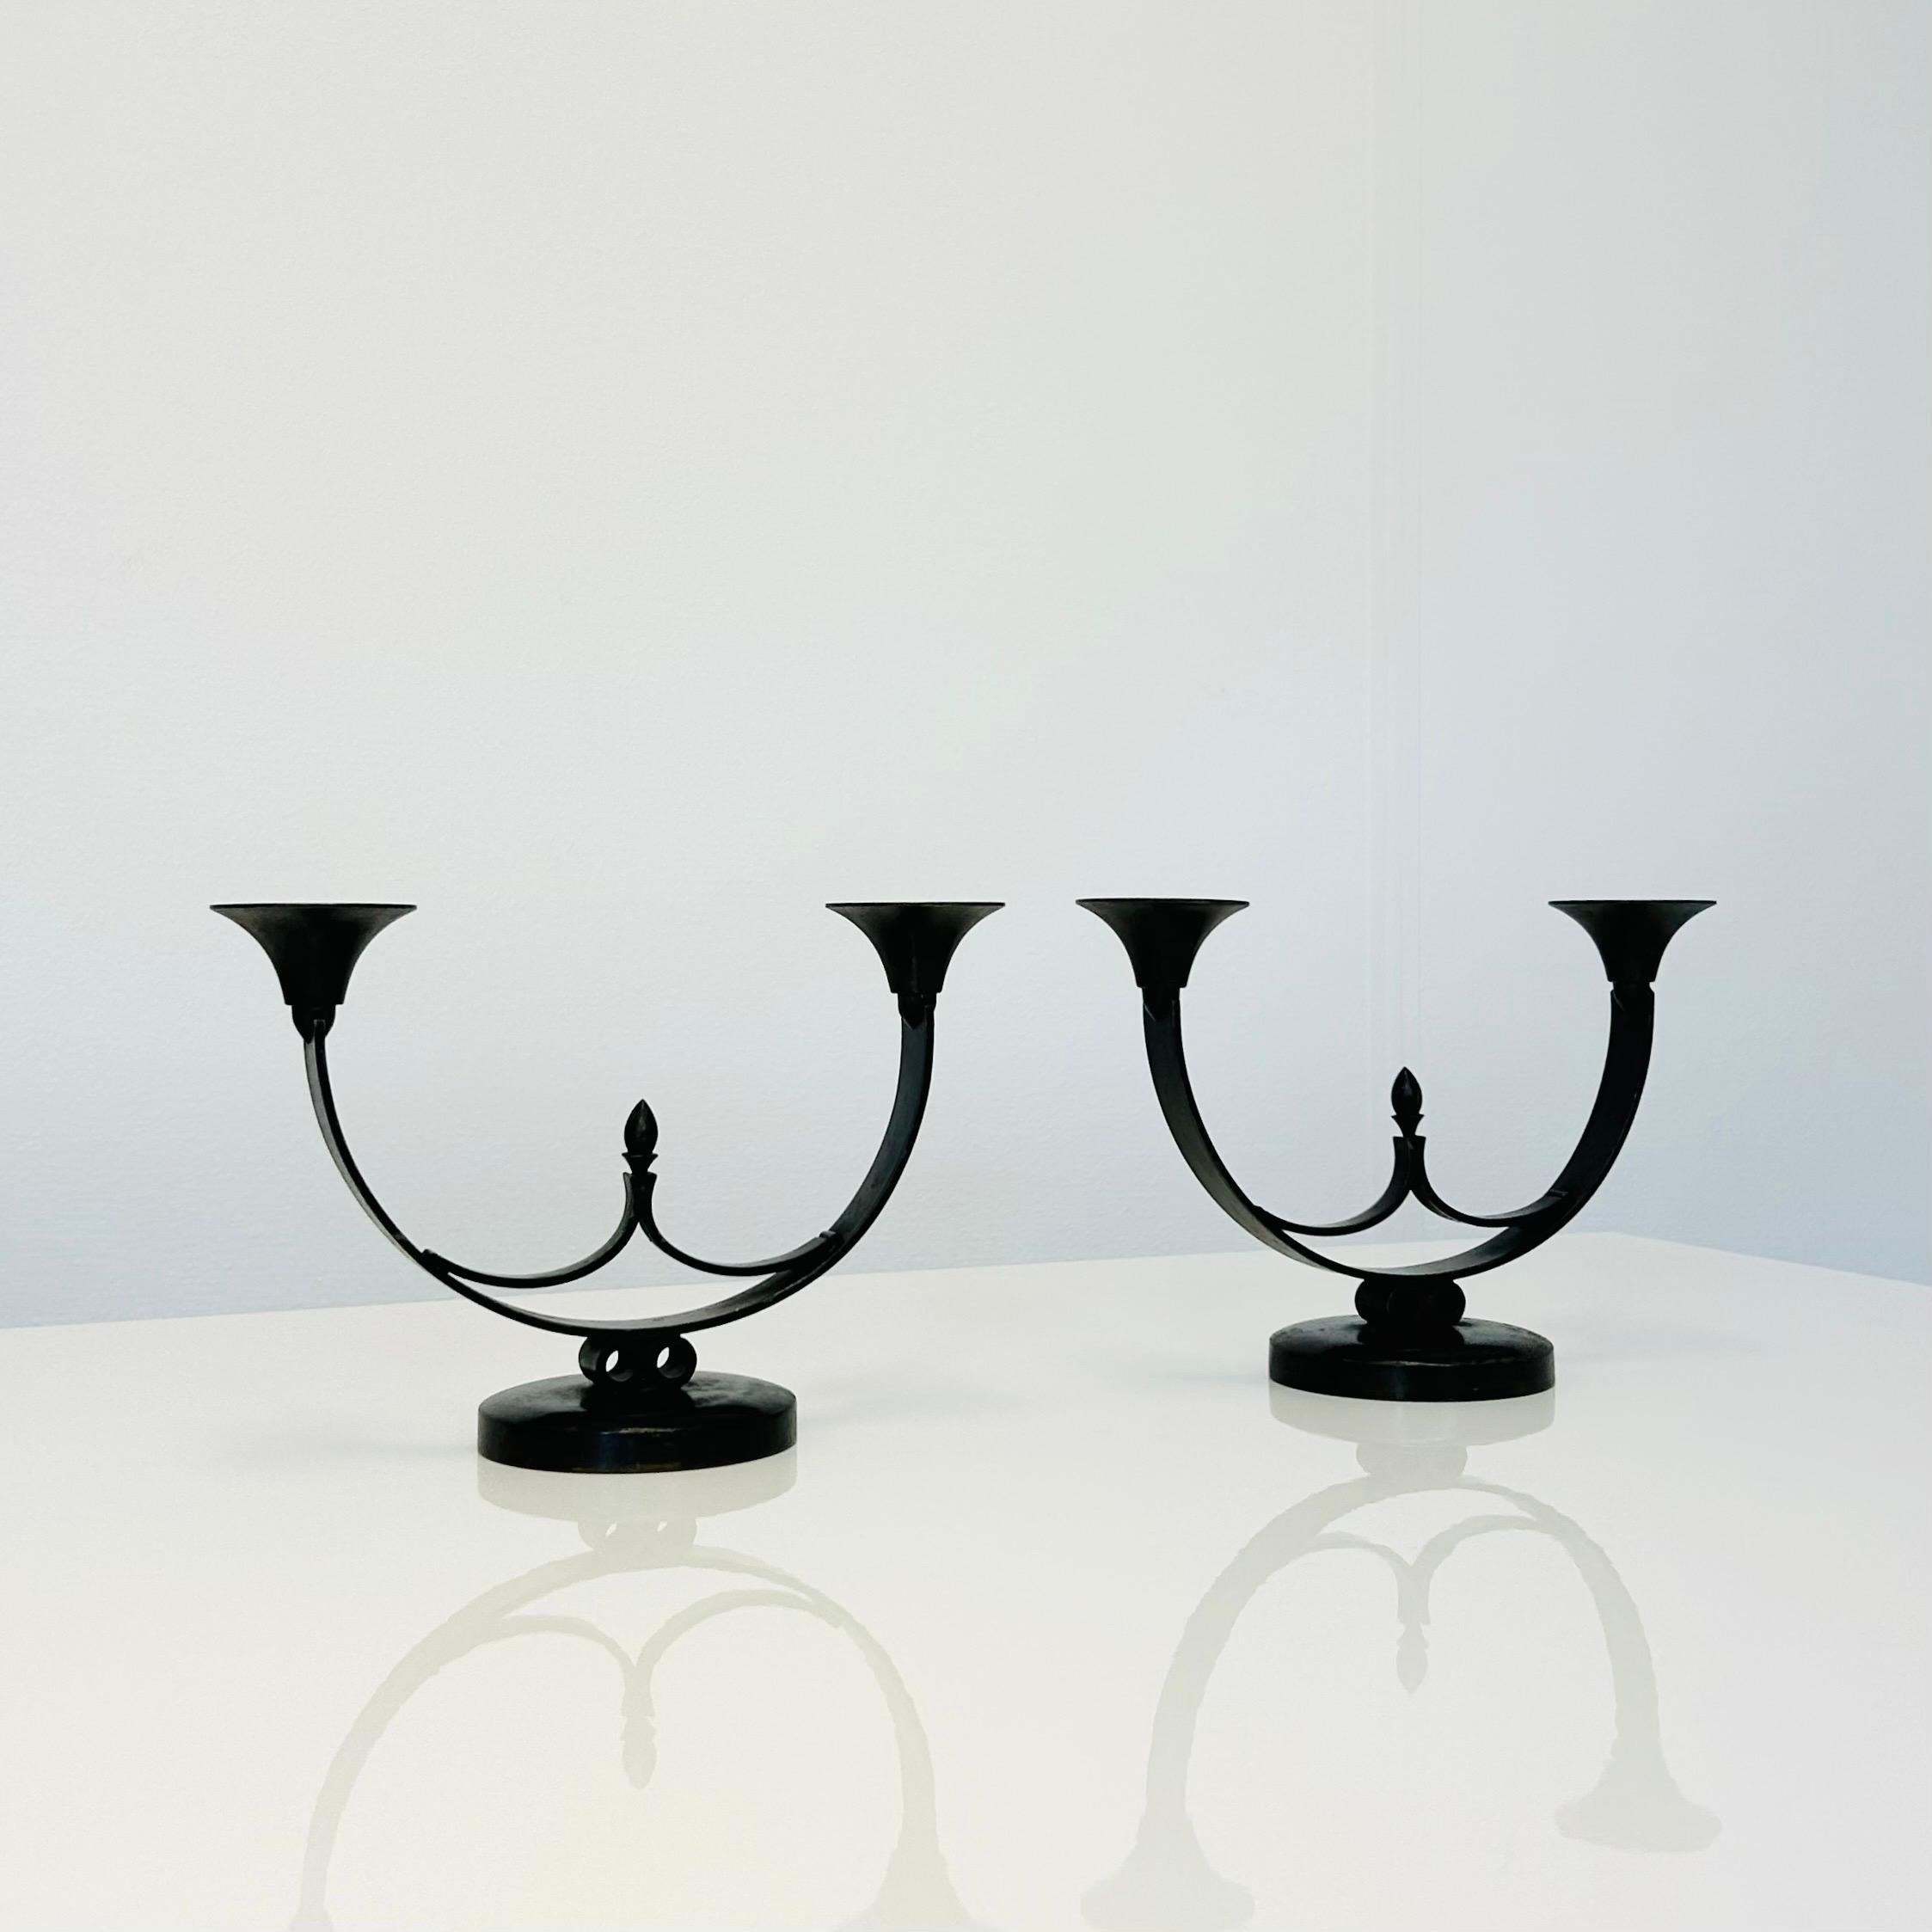 Danish Pair of Light Bronze Candle Holders by Just Andersen, 1930s, Denmark For Sale